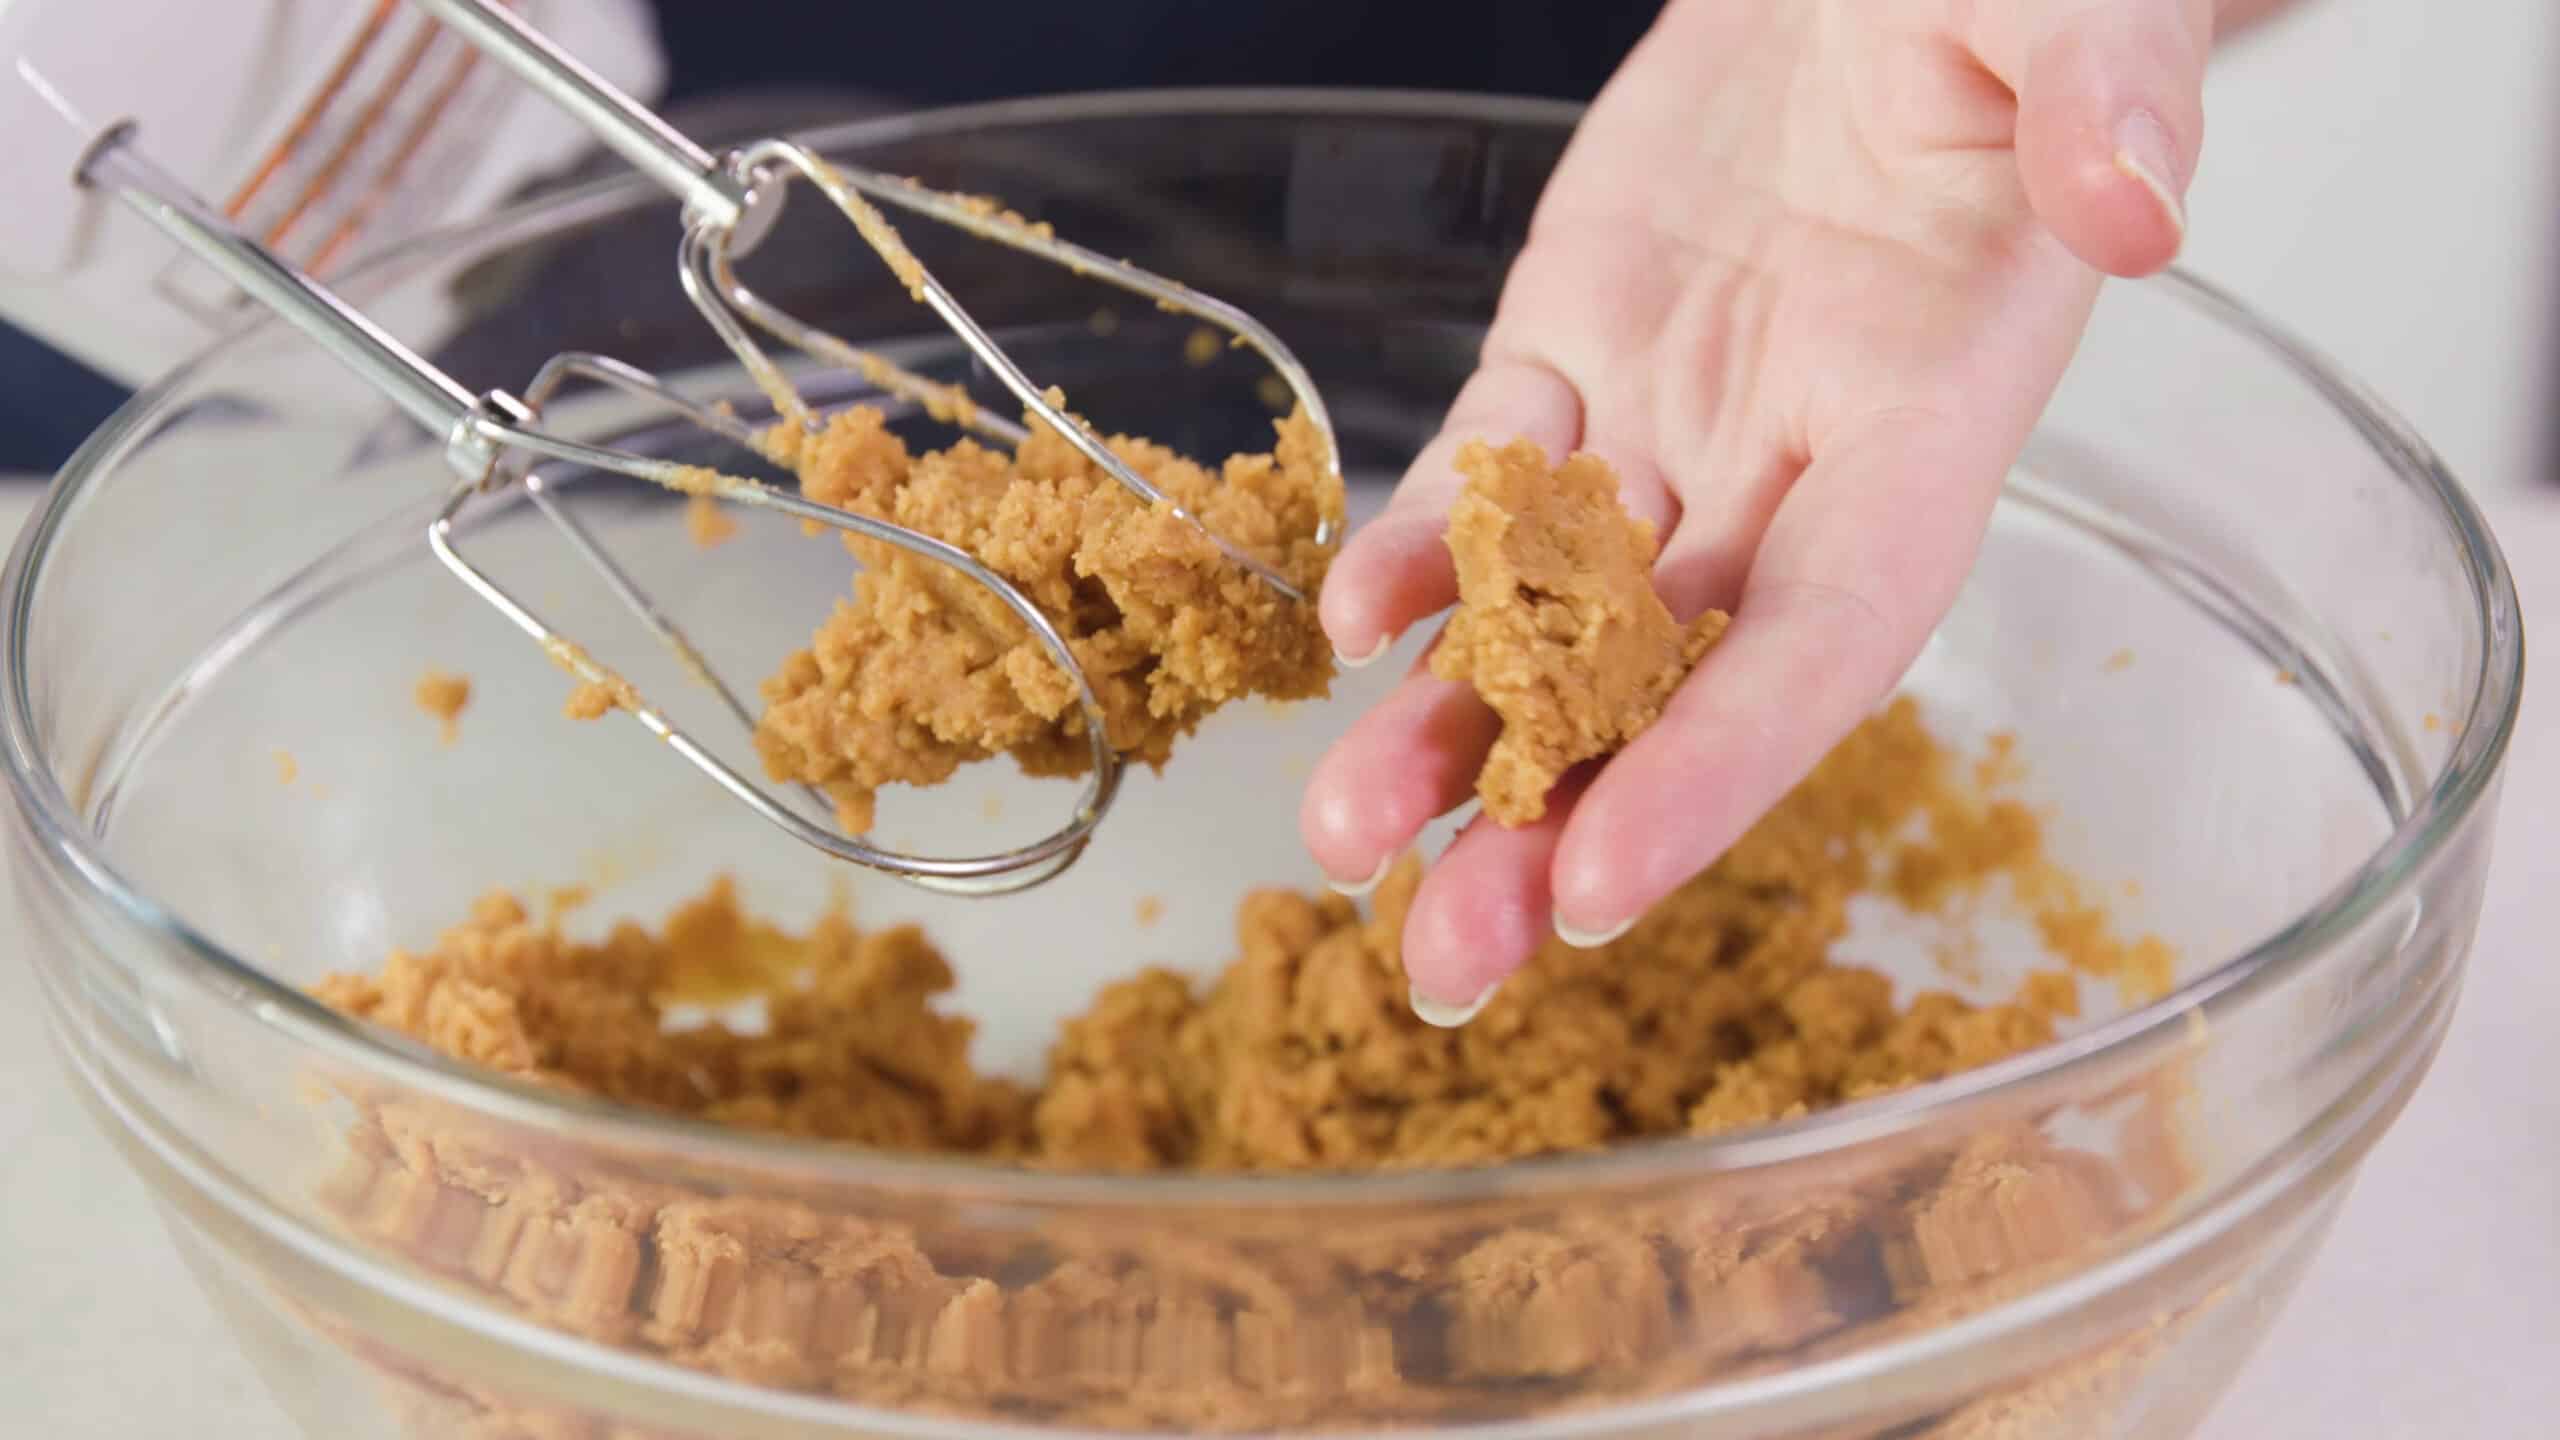 Close-up view of a hand with bit of pinched peanut butter cookie dough to show how the dough comes together to form cookie dough balls with hand mixer beaters covered with cookie dough and a clear glass mixing bowl filled with cookie dough in the background.